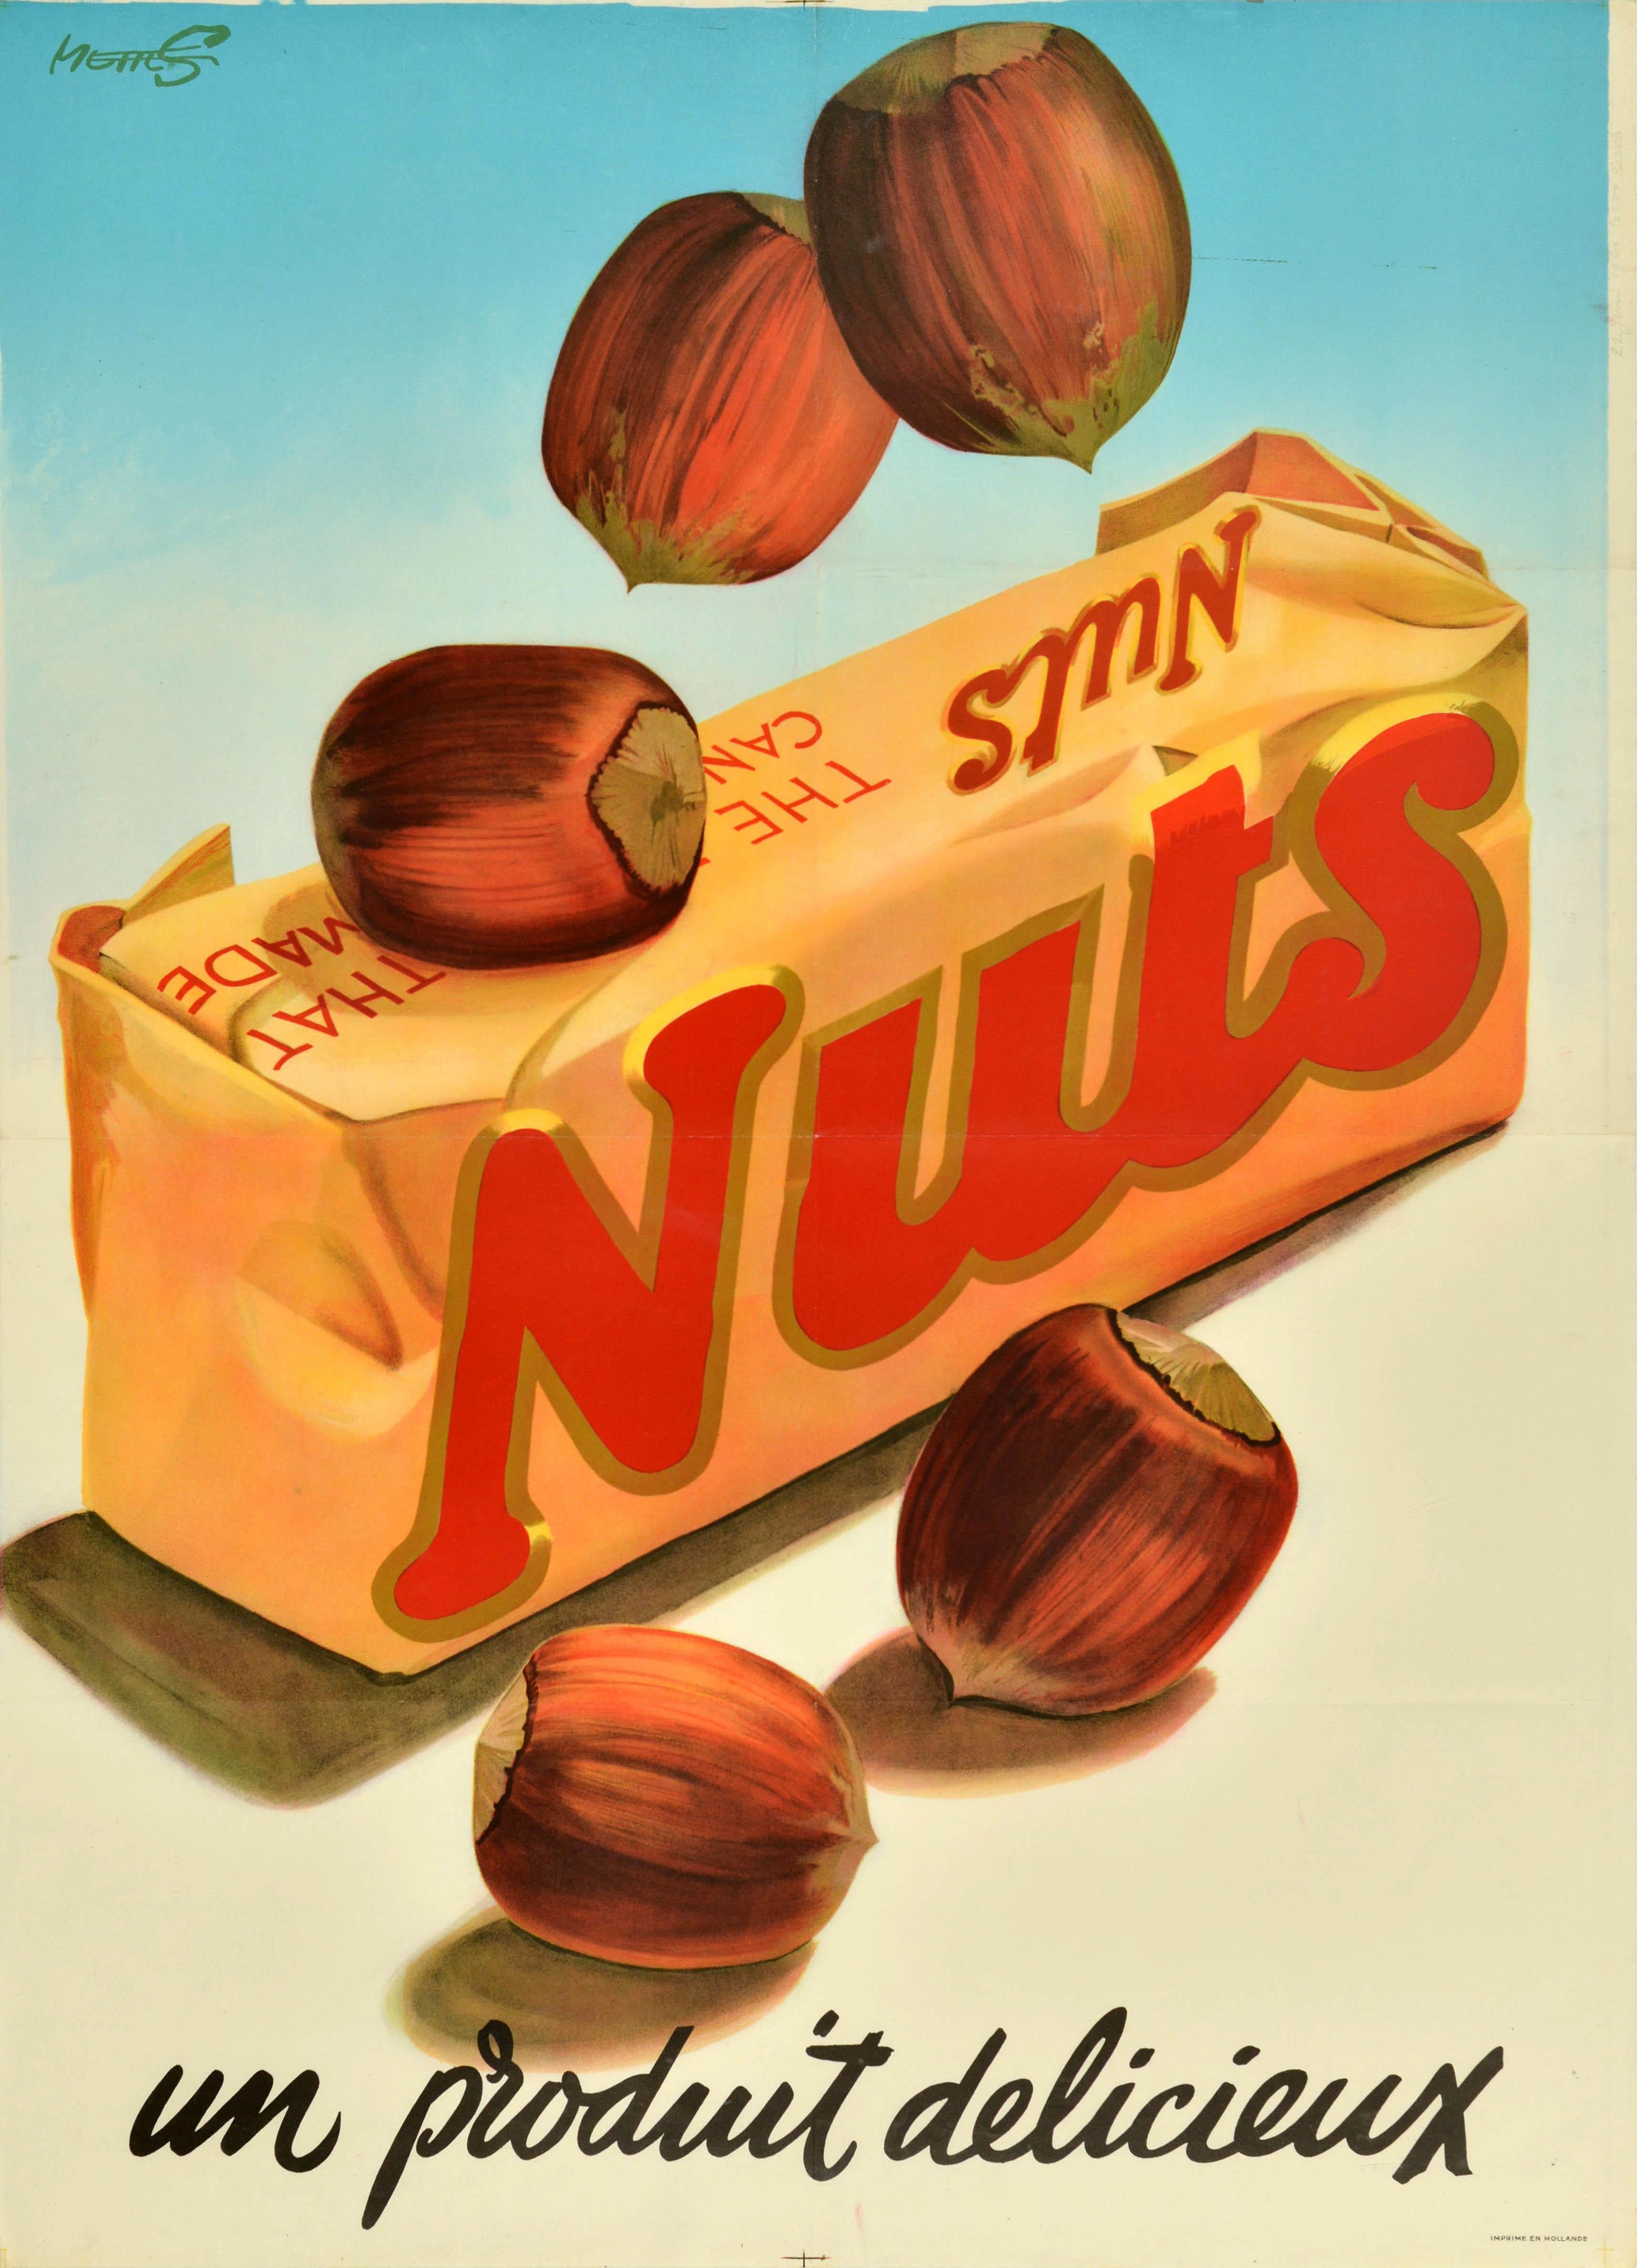 Unknown Print - Original Vintage Food Advertising Poster Nuts Chocolate Bar Delicious Product